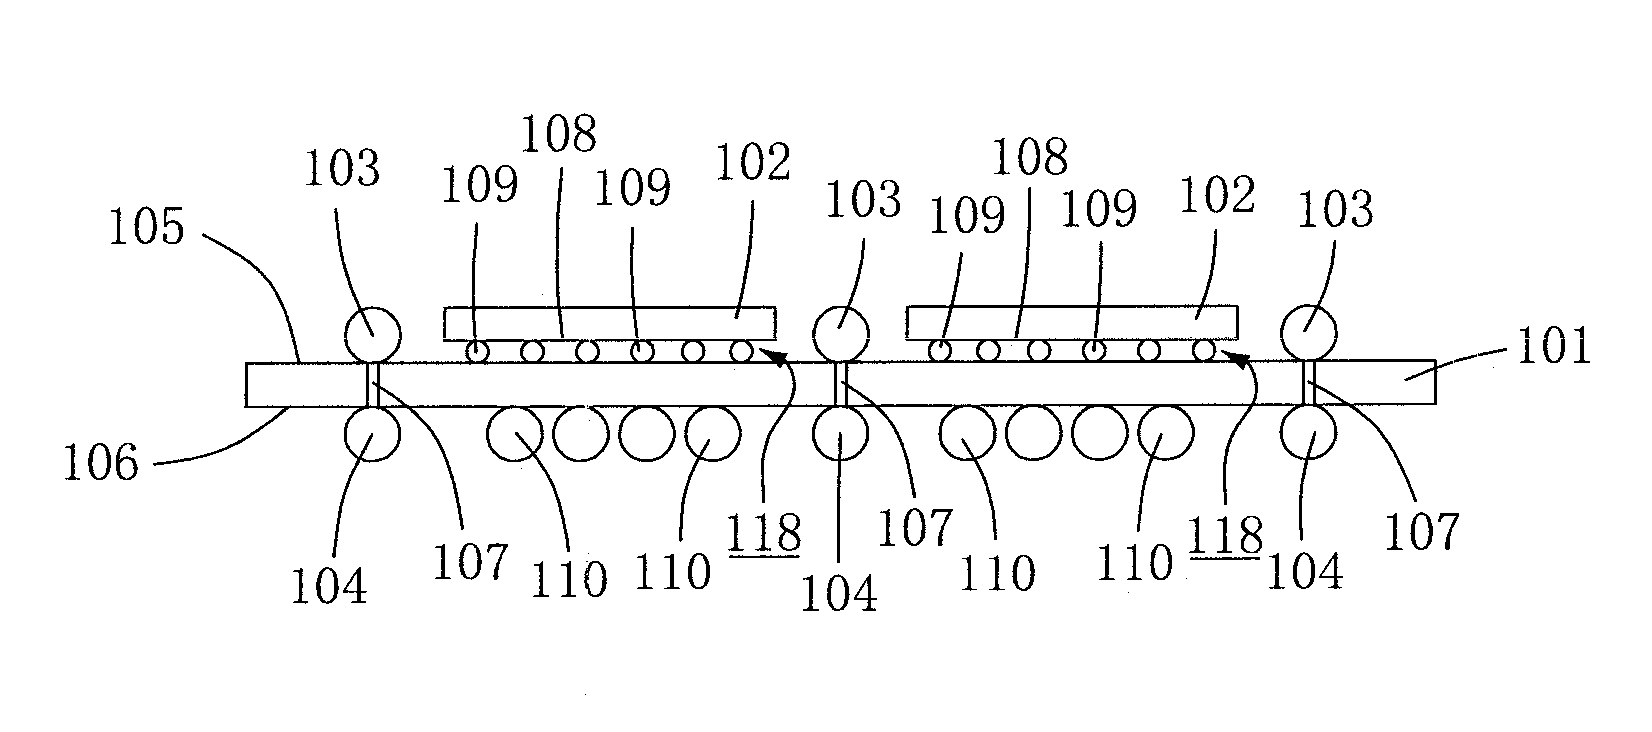 Semiconductor package with electromagnetic shielding capabilites